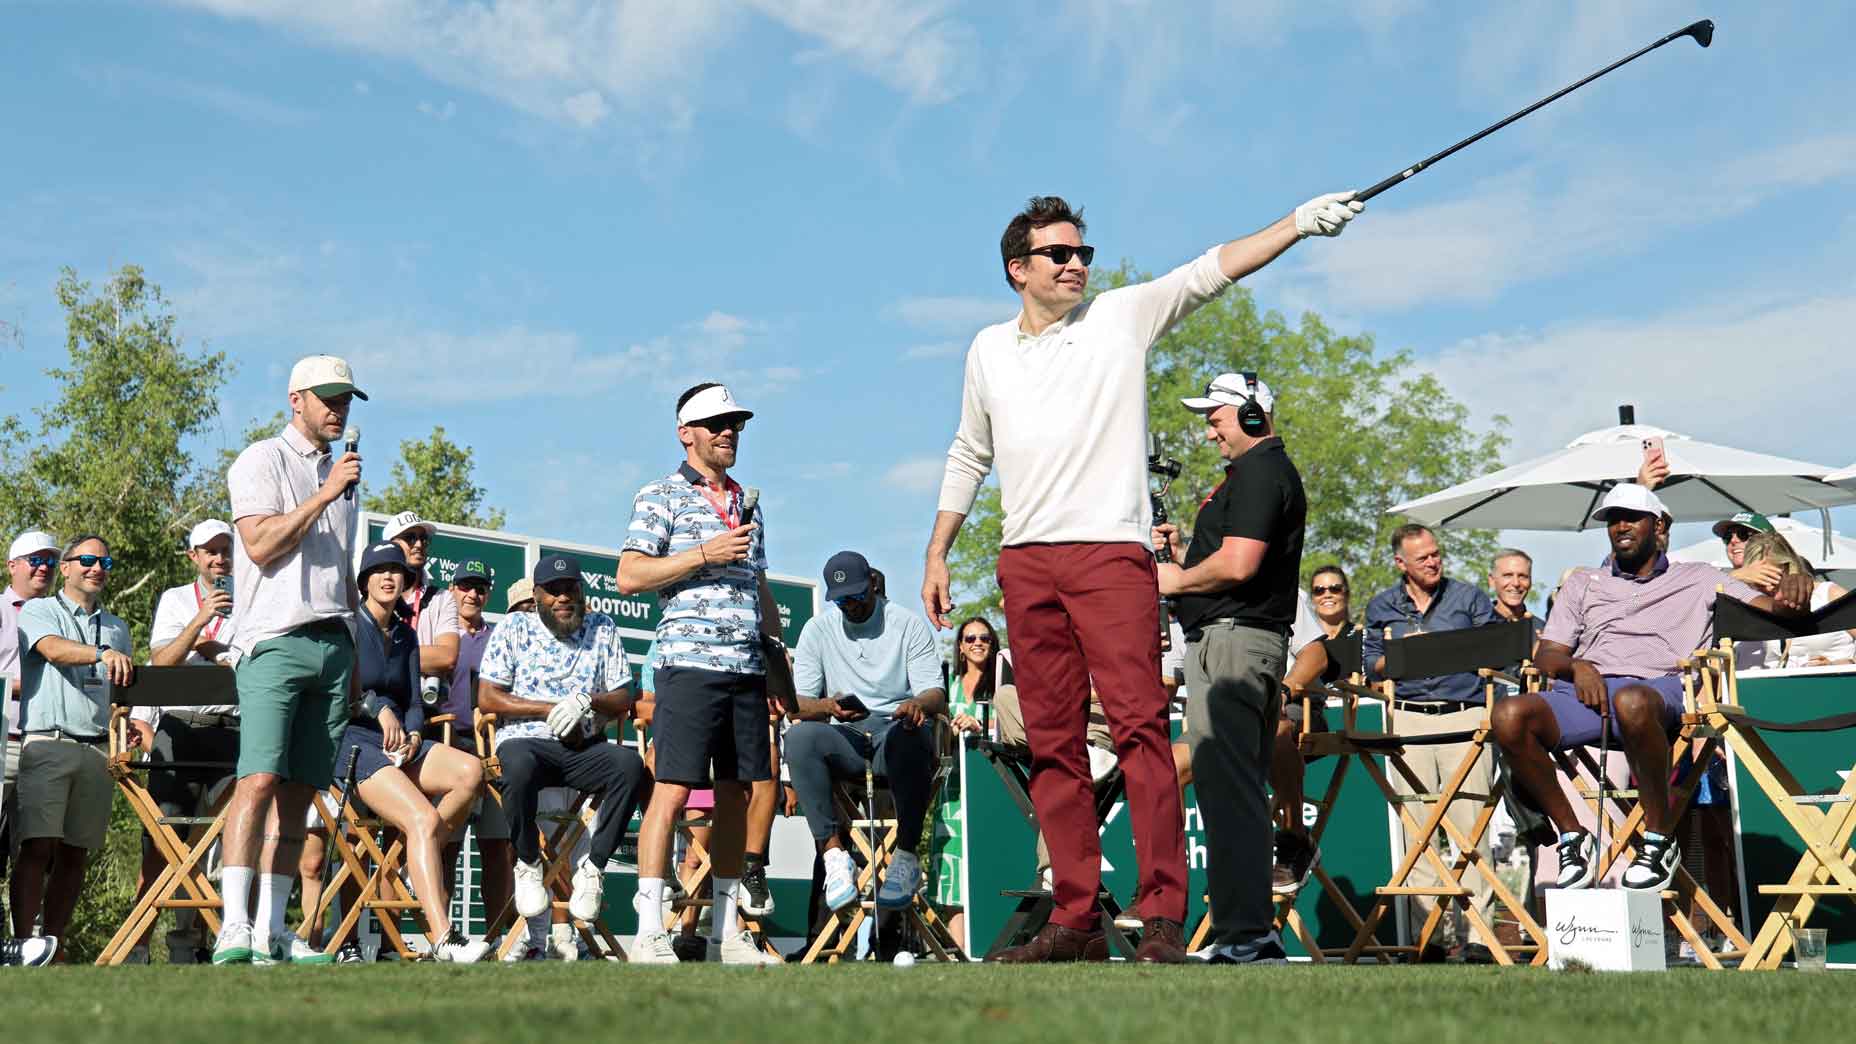 At the annual 8AM Invitational, Jimmy Fallon and Justin Timberlake proved just how fun golf can be